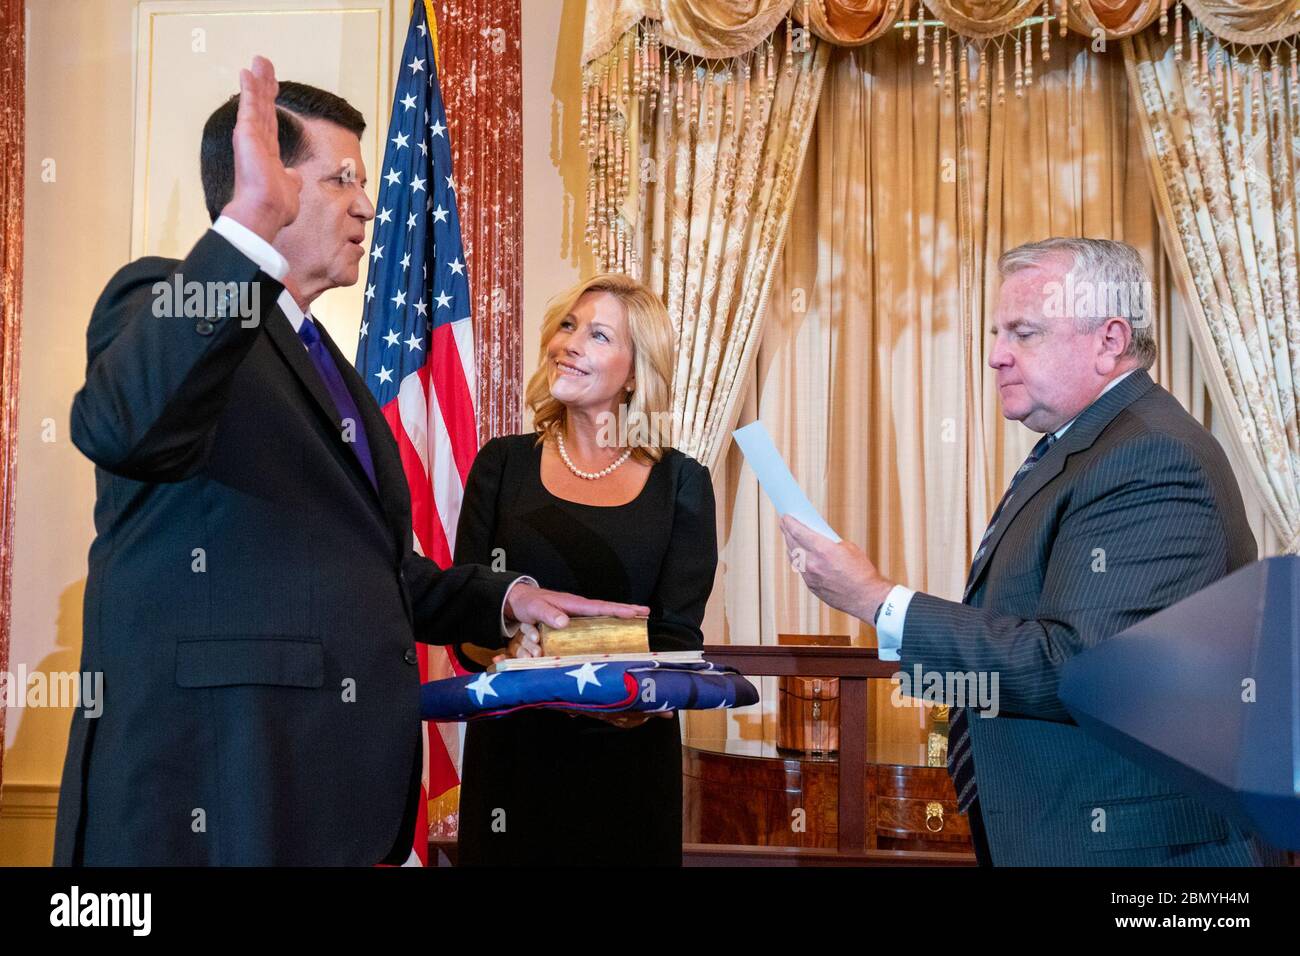 Deputy Secretary Sullivan Officiates the Swearing-In Ceremony for Under Secretary Krach Deputy Secretary of State John Sullivan officiates the ceremonial swearing-in ceremony for Under Secretary of State for Economic Growth, Energy, and the Environment Keith Krach, at the U.S. Department of State in Washington, D.C., on September 16, 2019. Stock Photo